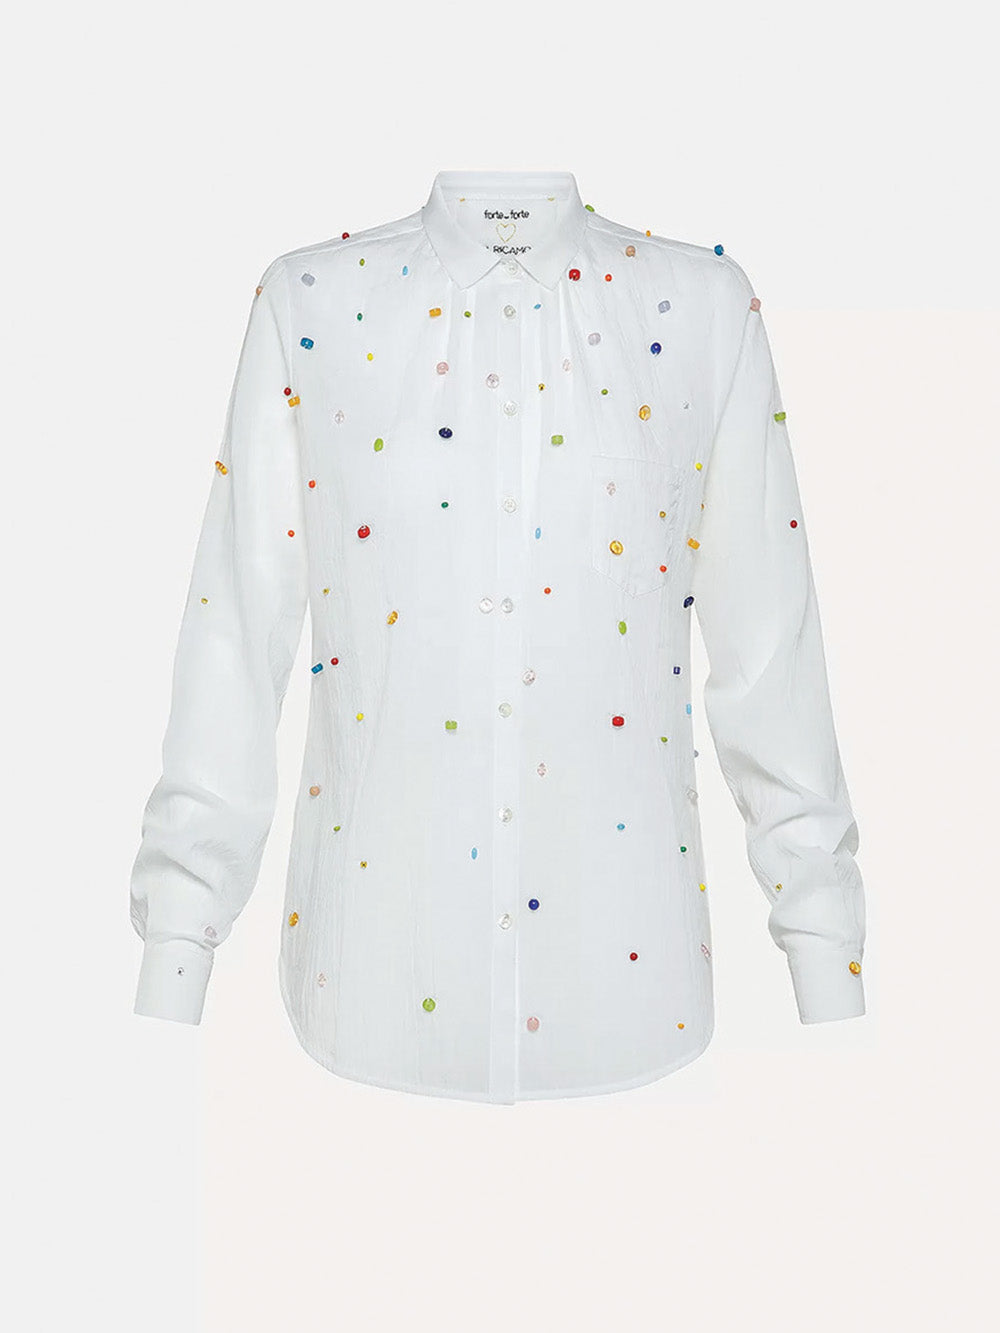 STARLIGHT SHIRT IN COTTON VOILE